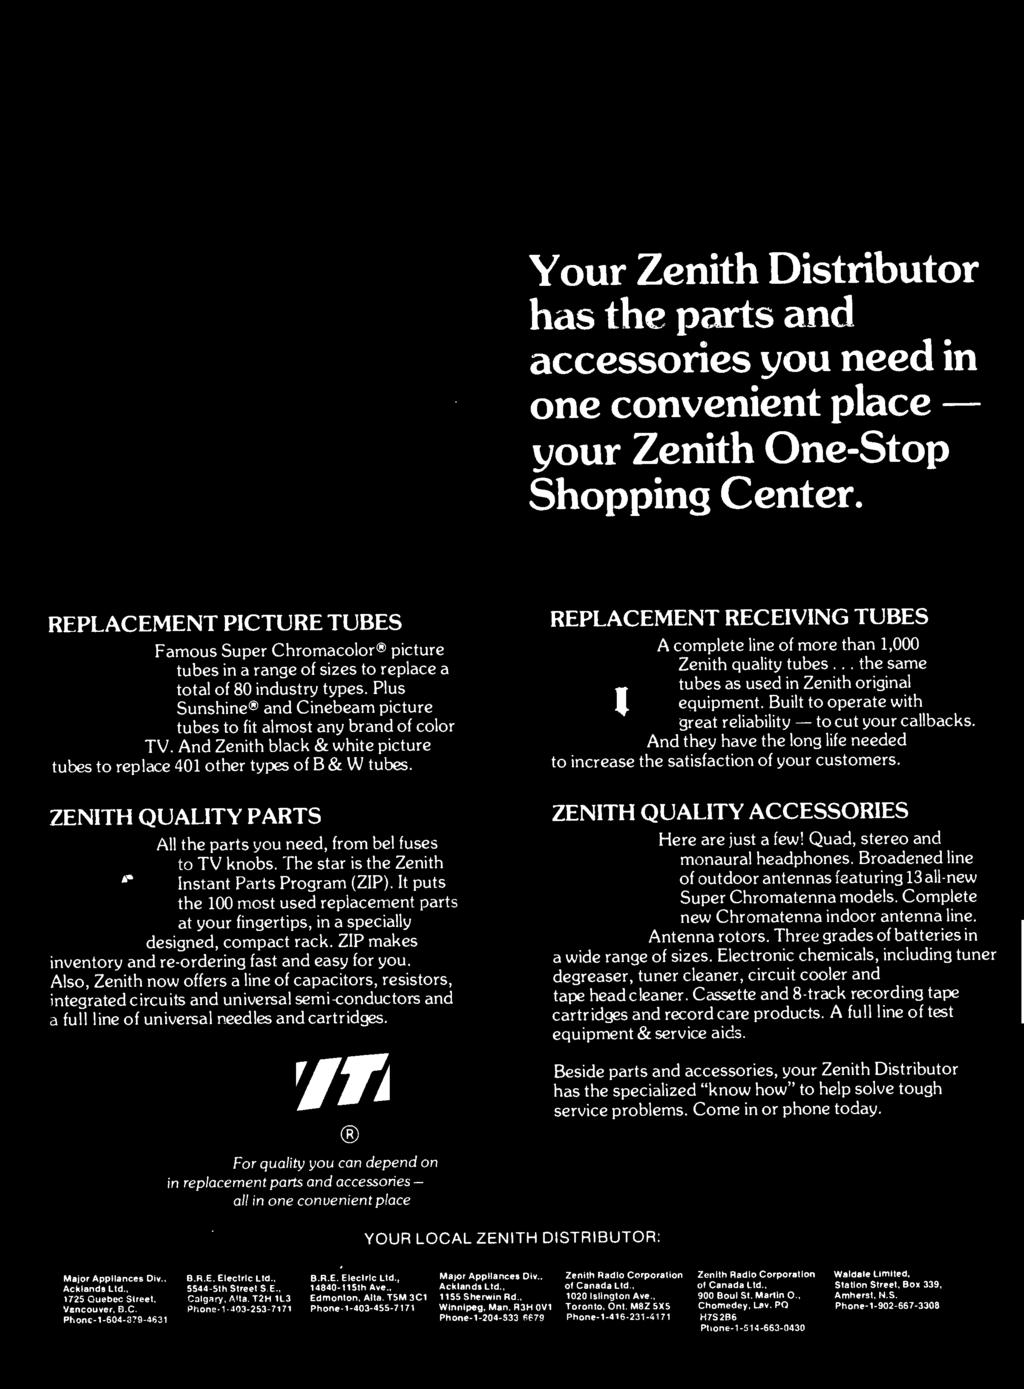 Come in or phone today. For quality you can depend on. in replacement parts and accessories - all in one convenient place YOUR LOCAL ZENITH DISTRIBUTOR: Major Appliances Div.